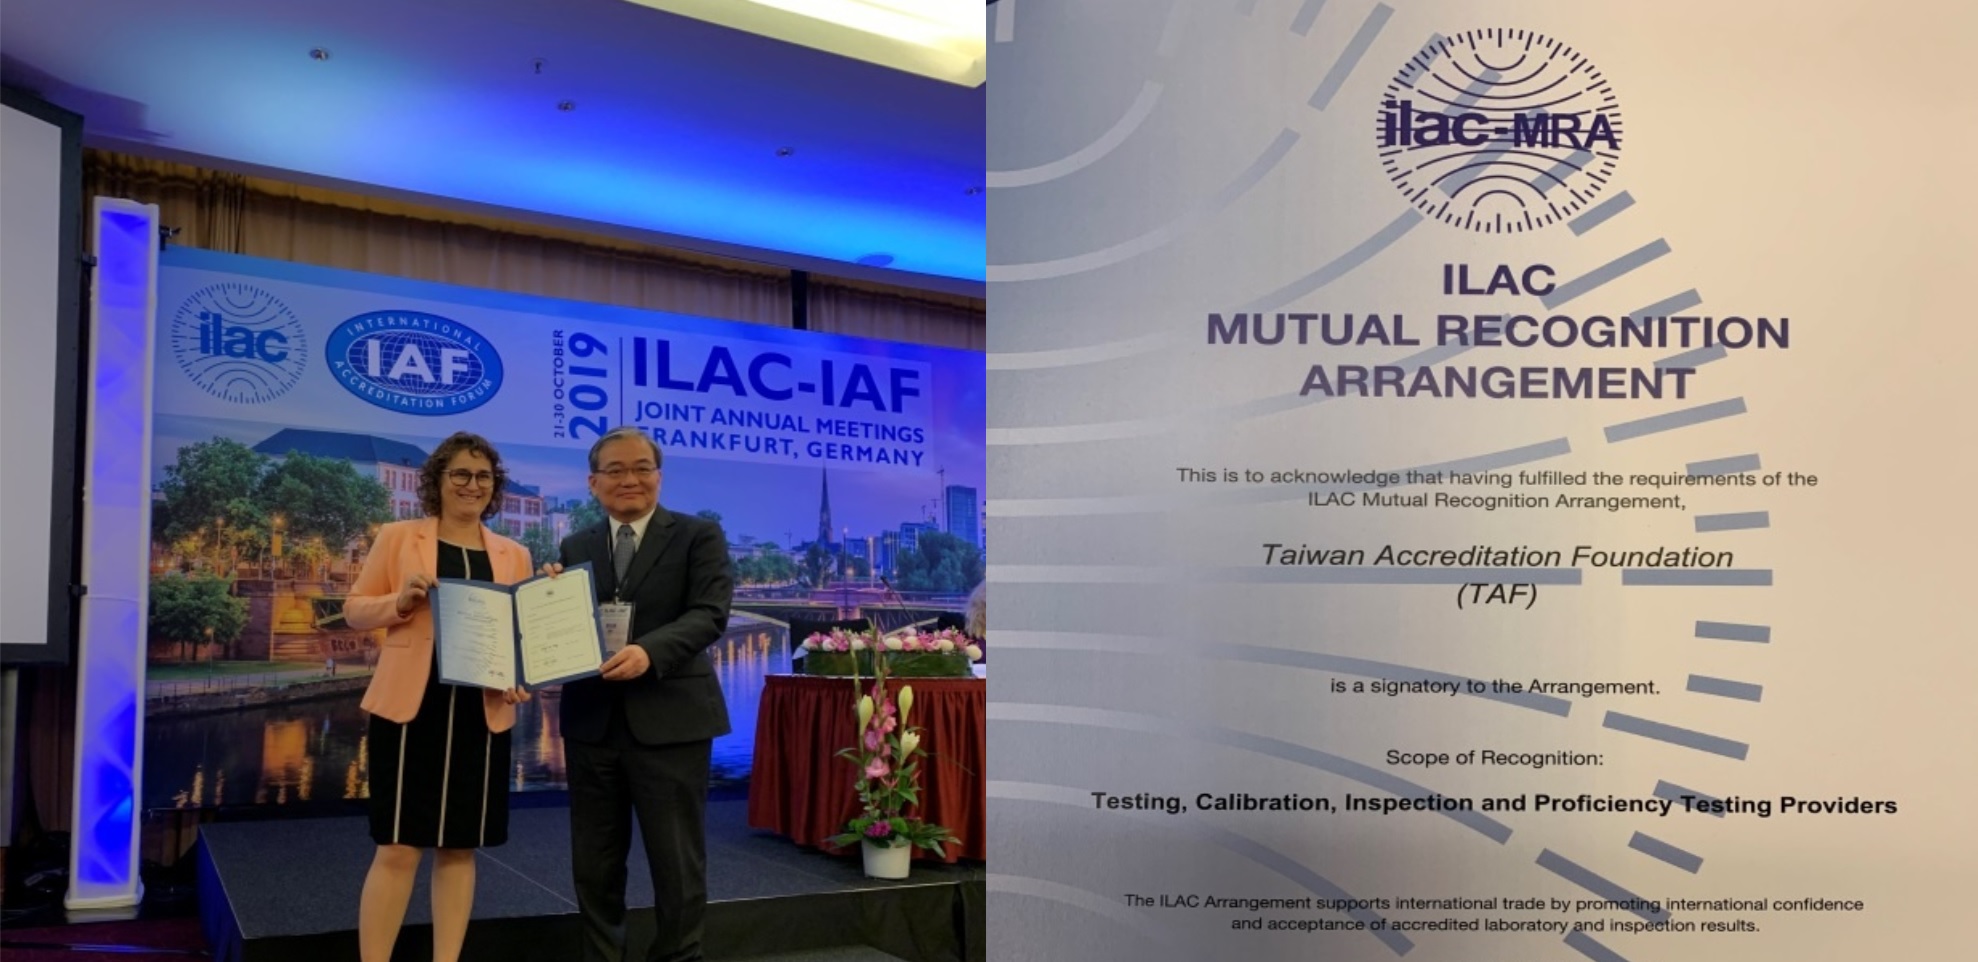 (Left)Photo of ILAC Chair Ms. Etty Feller and TAF CEO, Mr. Shu Chin-Sin at the certificate presentation ceremony (Oct. 29, 2019, Frankfurt)(Right)Taiwan Accreditation Foundation (TAF) is one of the first among the world to sign the International Laboratory Accreditation Cooperation (ILAC) Mutual Recognition Agreement (MRA) for Proficiency Testing Provider (PTP). The signing representative for president of TAF, Mr. Wang Chung-Lin.